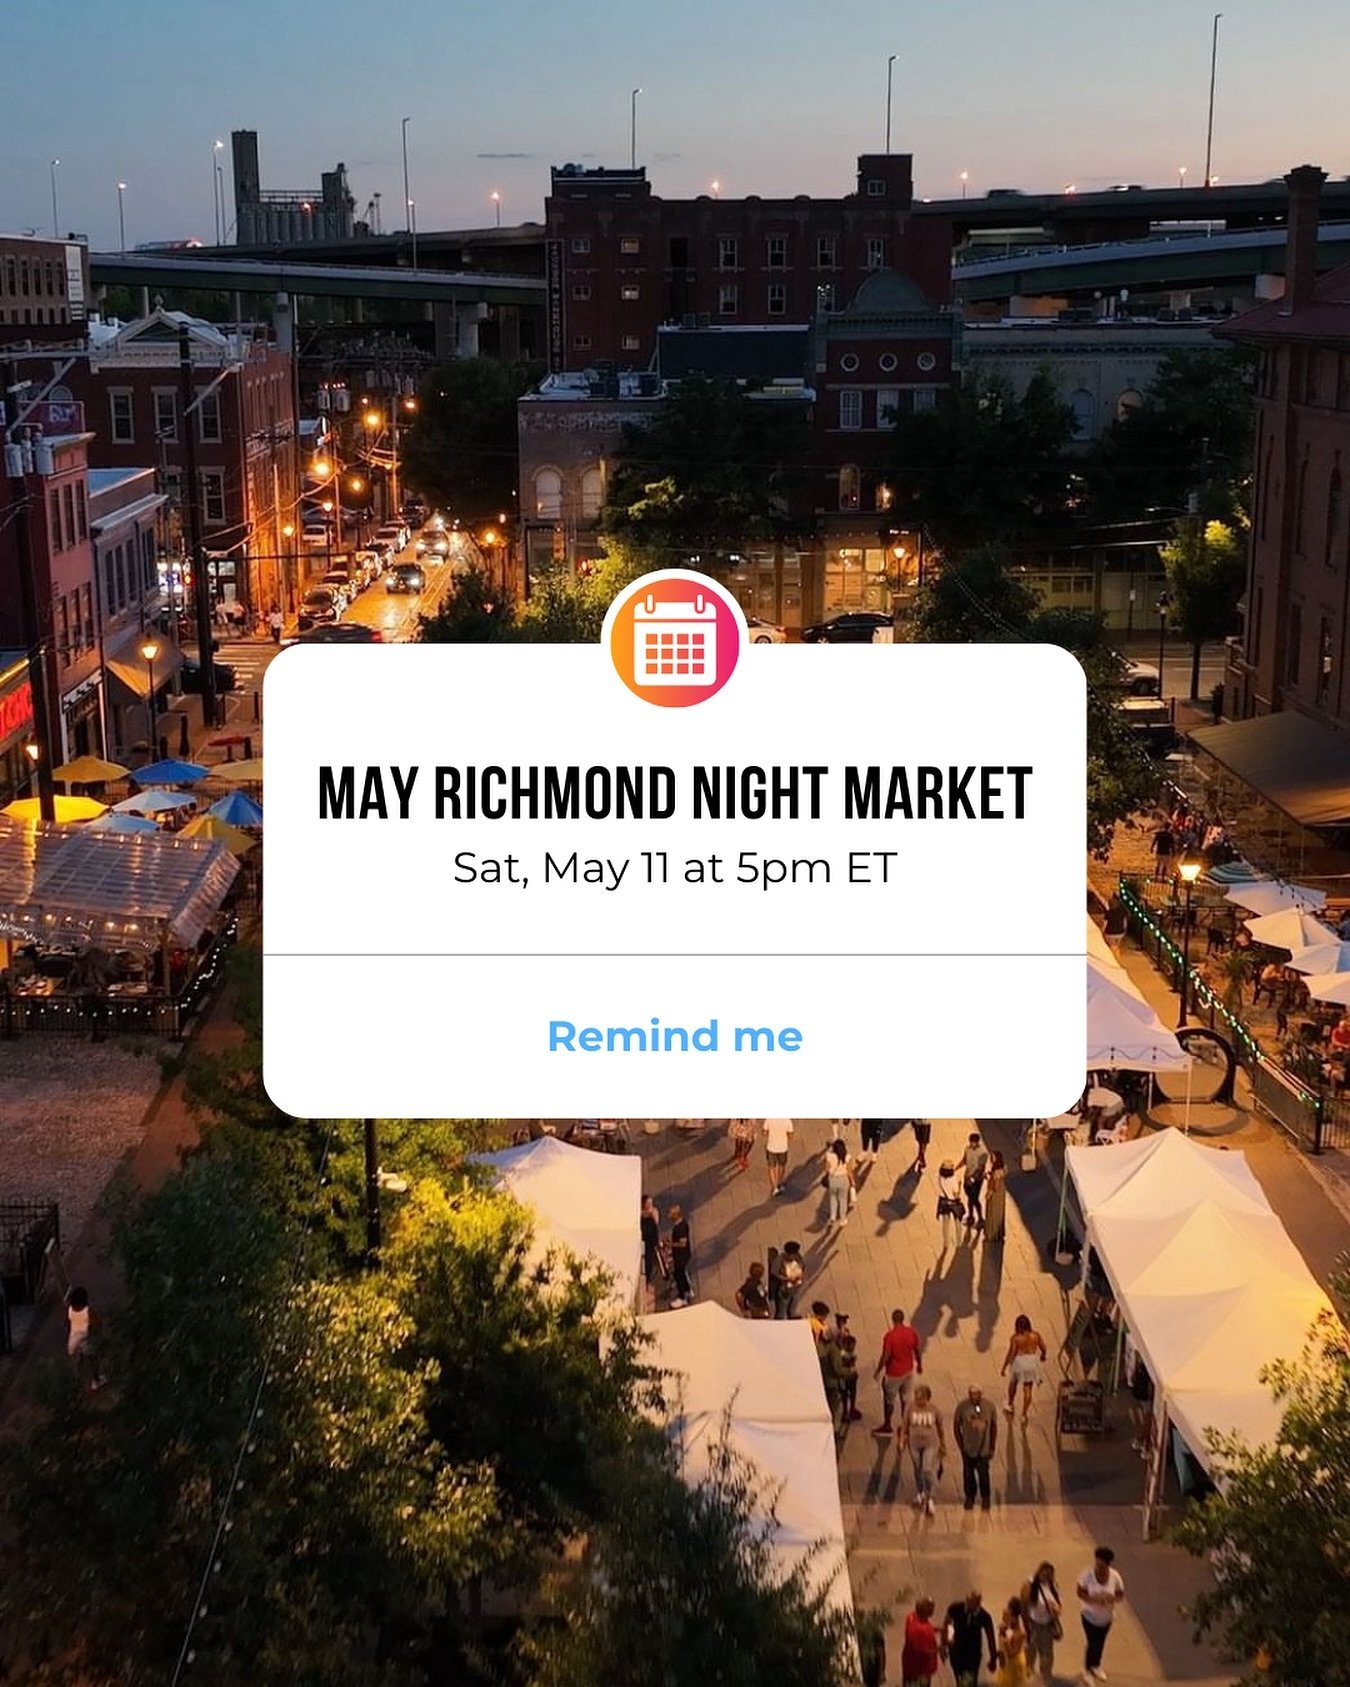 Get ready! The countdown has begun. Join us next Saturday, May 11th, for the upcoming Richmond Night Market. 

🎶 Immerse yourself in the sounds of @tuesdayversestheopenmic. 

🎨 Admire art by @auz_can. 

👨&zwj;👩&zwj;👧&zwj;👦 Experience endless fa